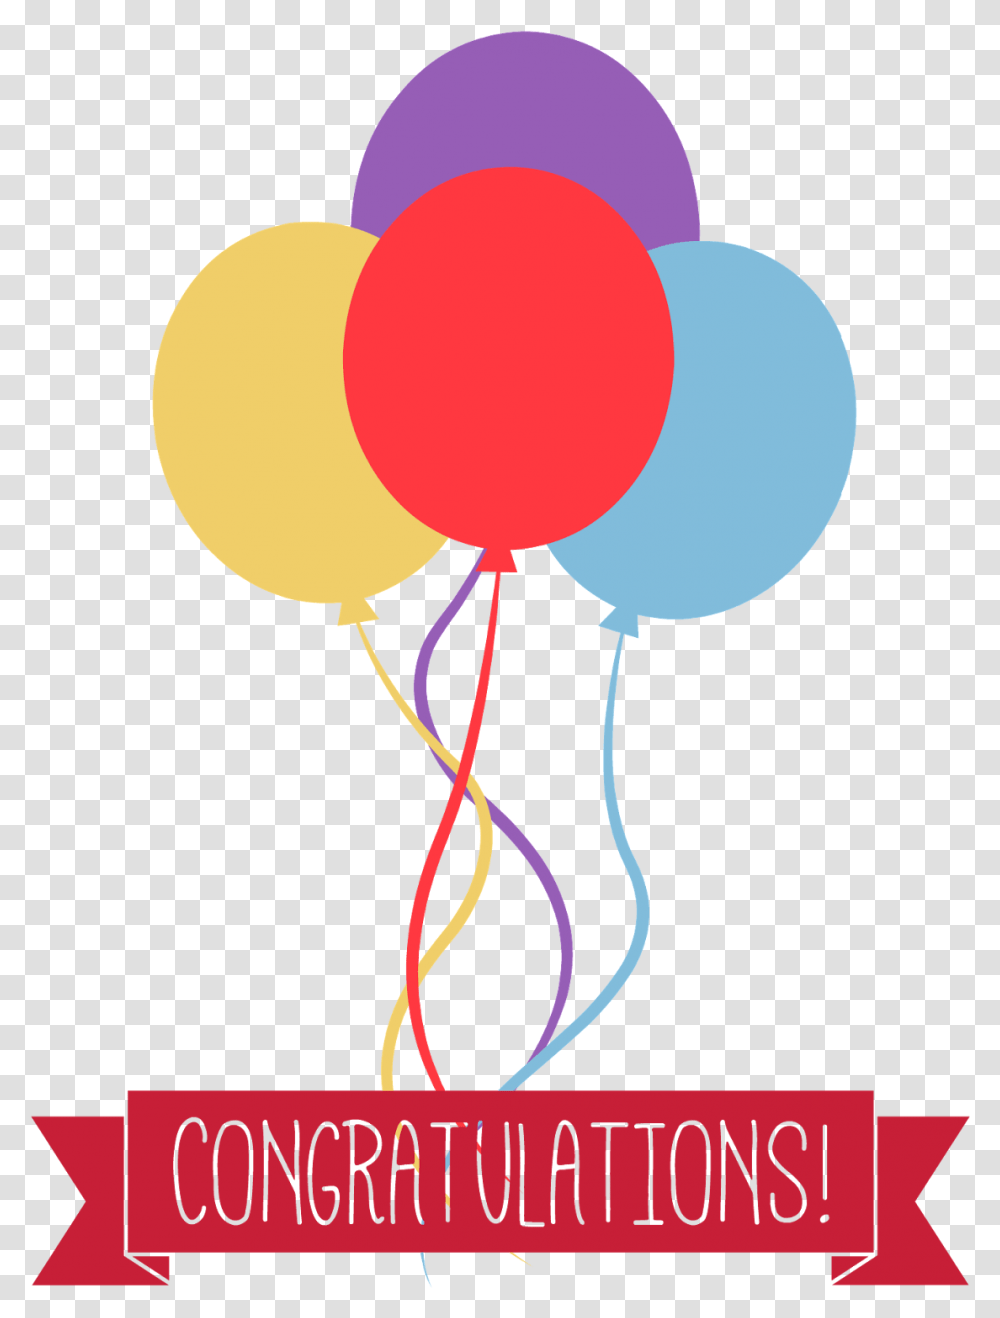 Congratulations Download Free Icon Vectors Happy 1 Month Work Anniversary, Balloon Transparent Png